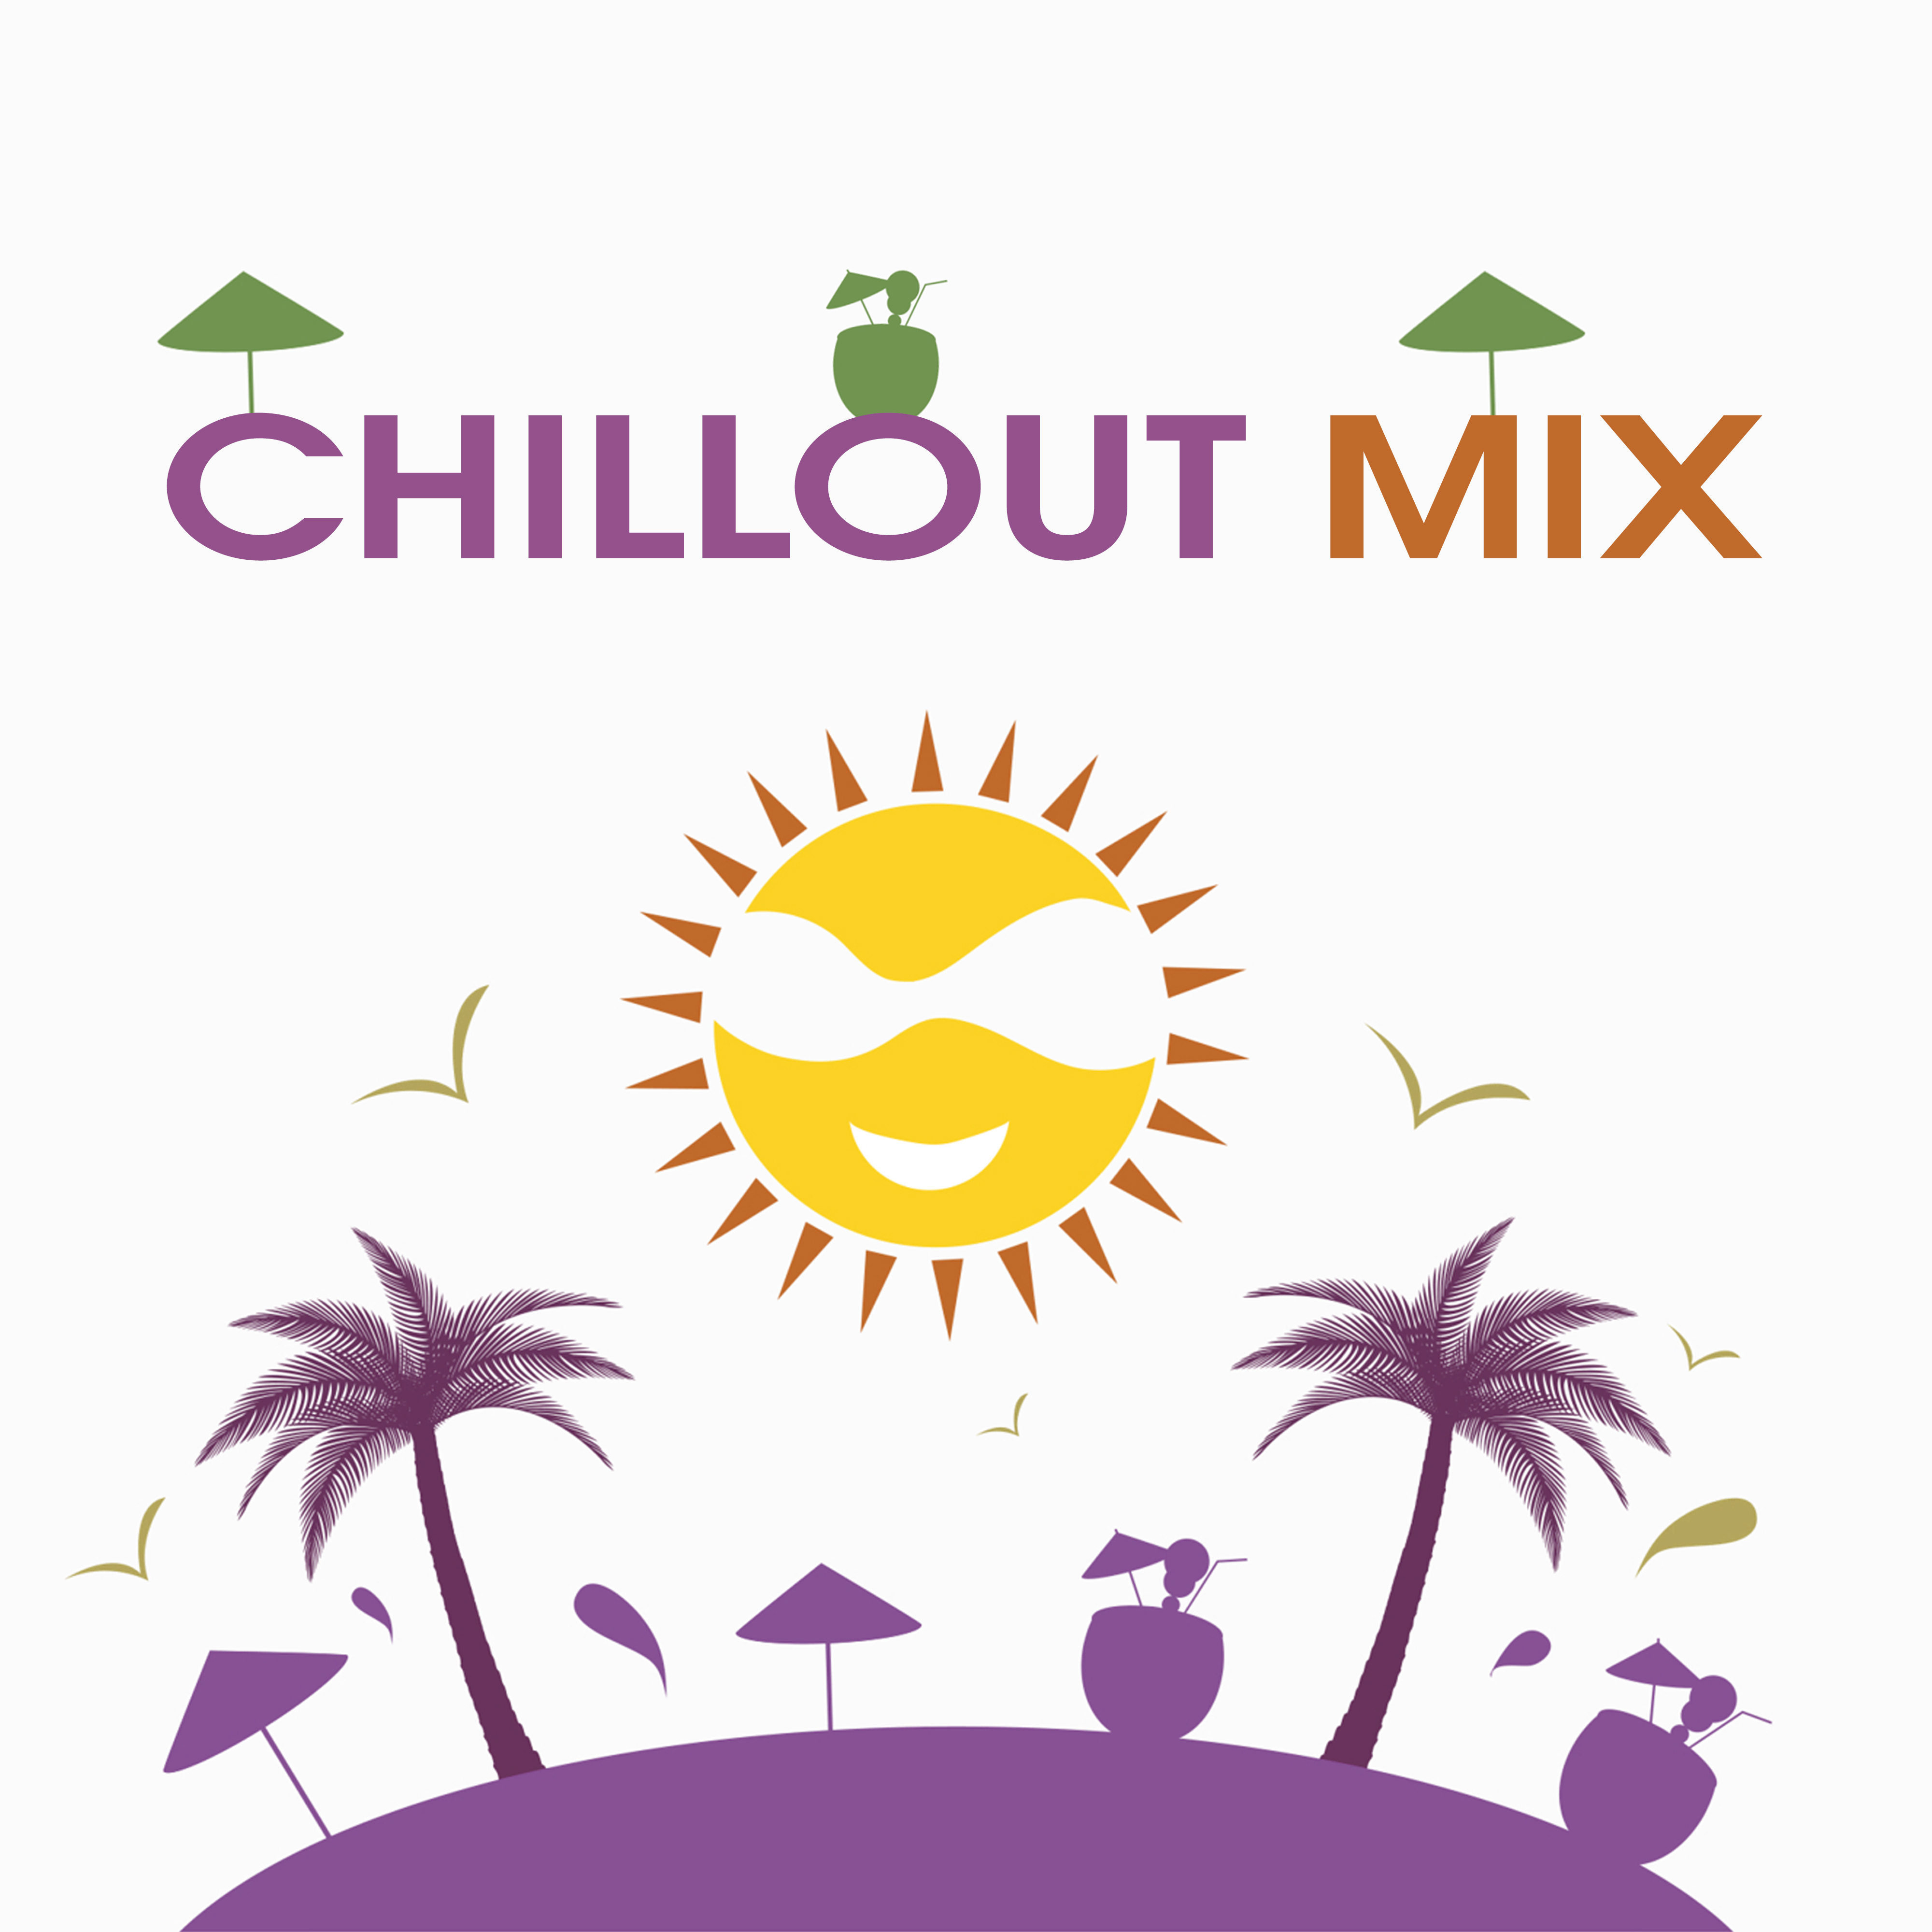 Chillout Mix – Summer Music, Lounge Tunes, Melodies to Rest, Deep Vibes, Relaxation